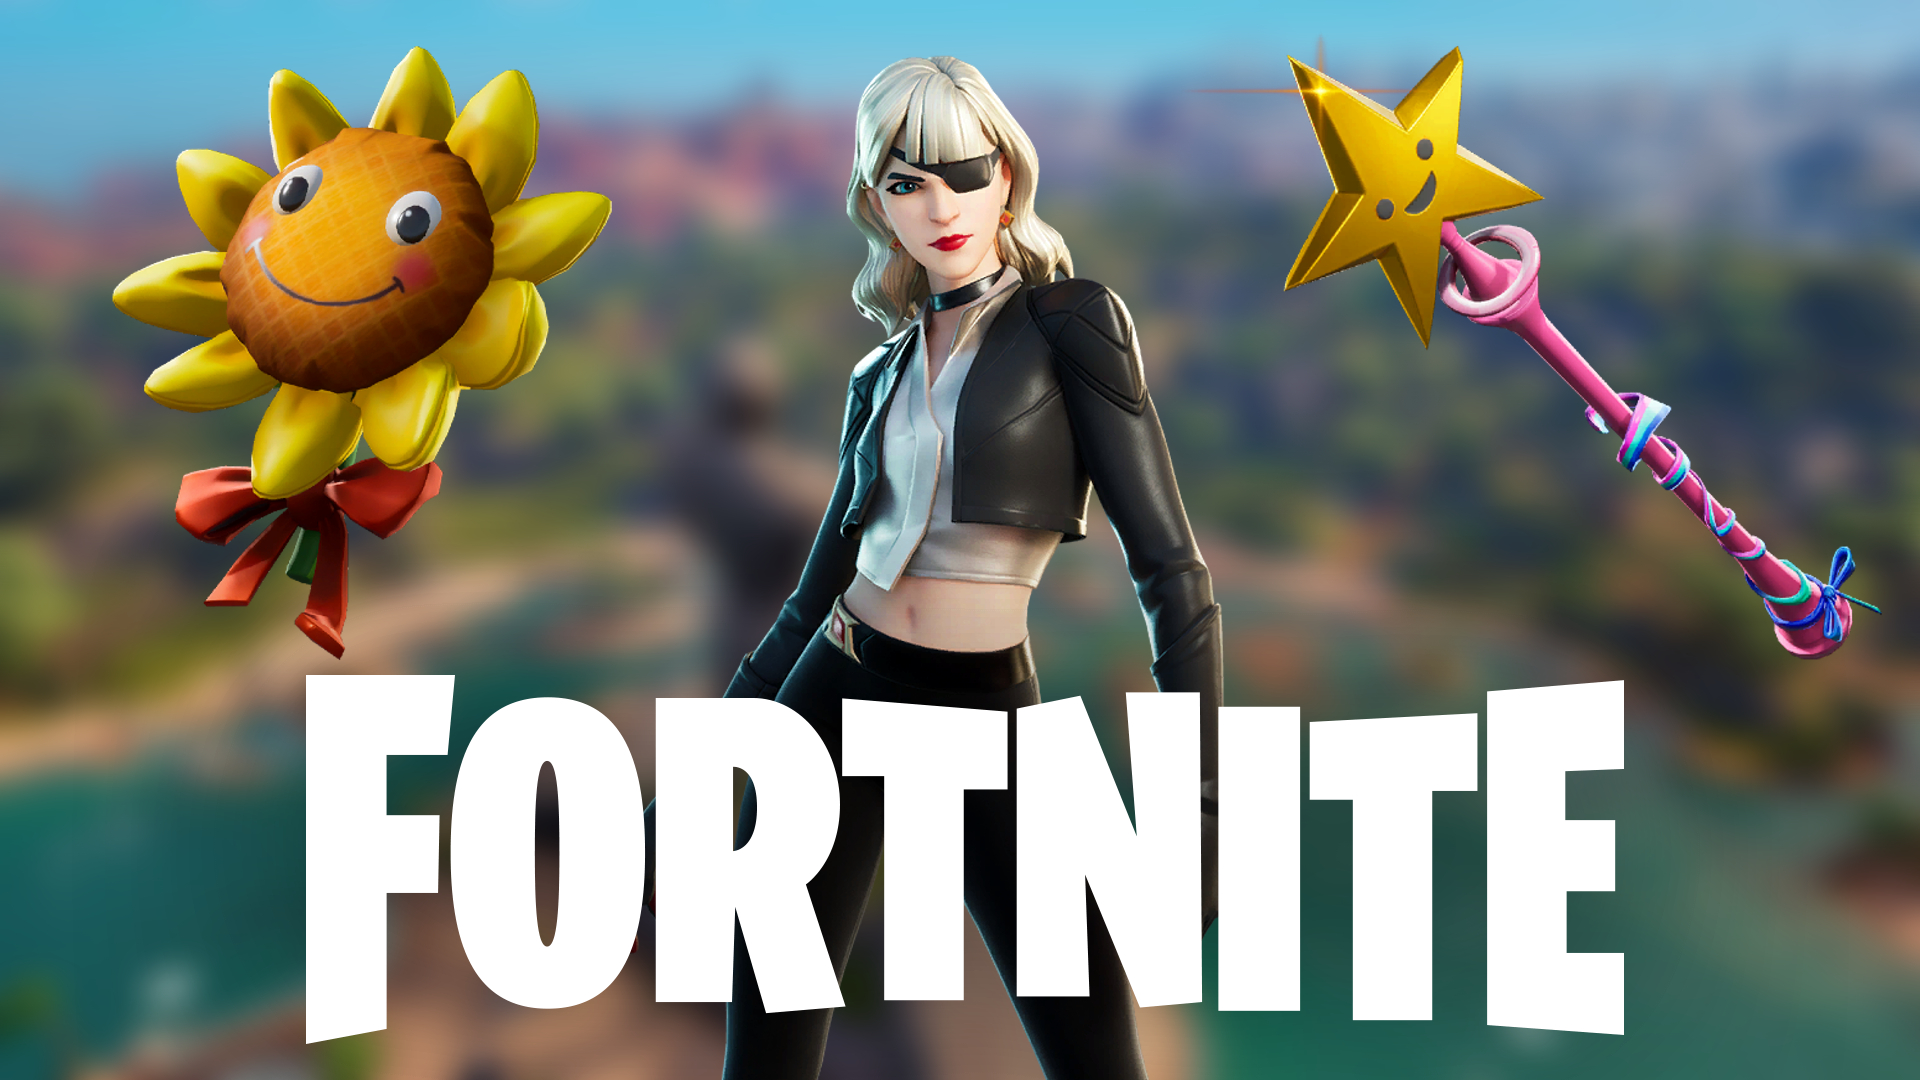 The sweatiest fortnite skins and cosmetics